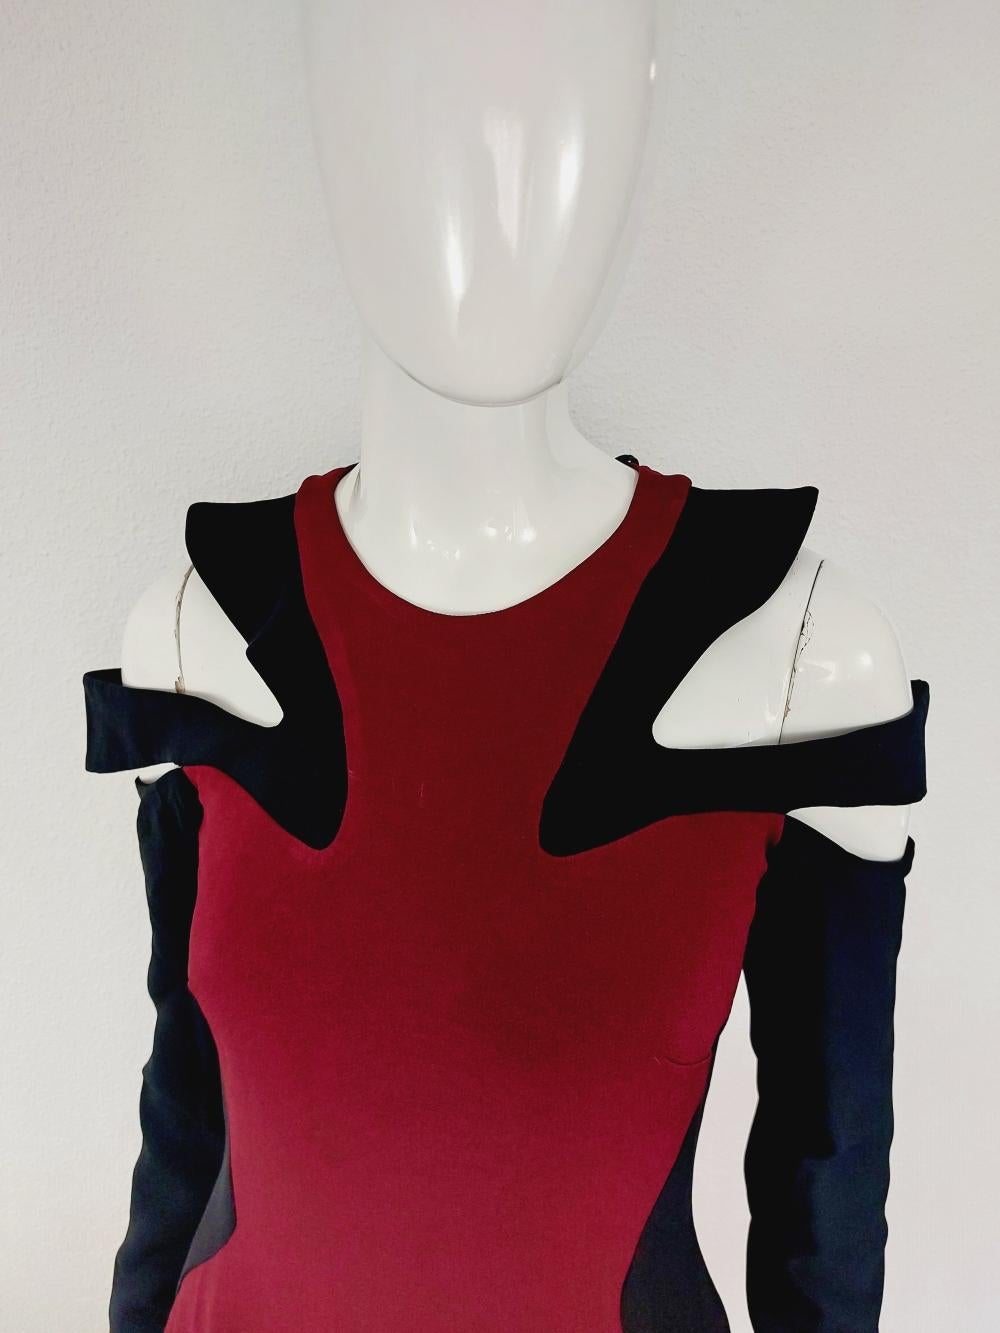 Thierry Mugler Couture Sculptural Cut-Out Silhouette Curved Corset Red Black Asy For Sale 5